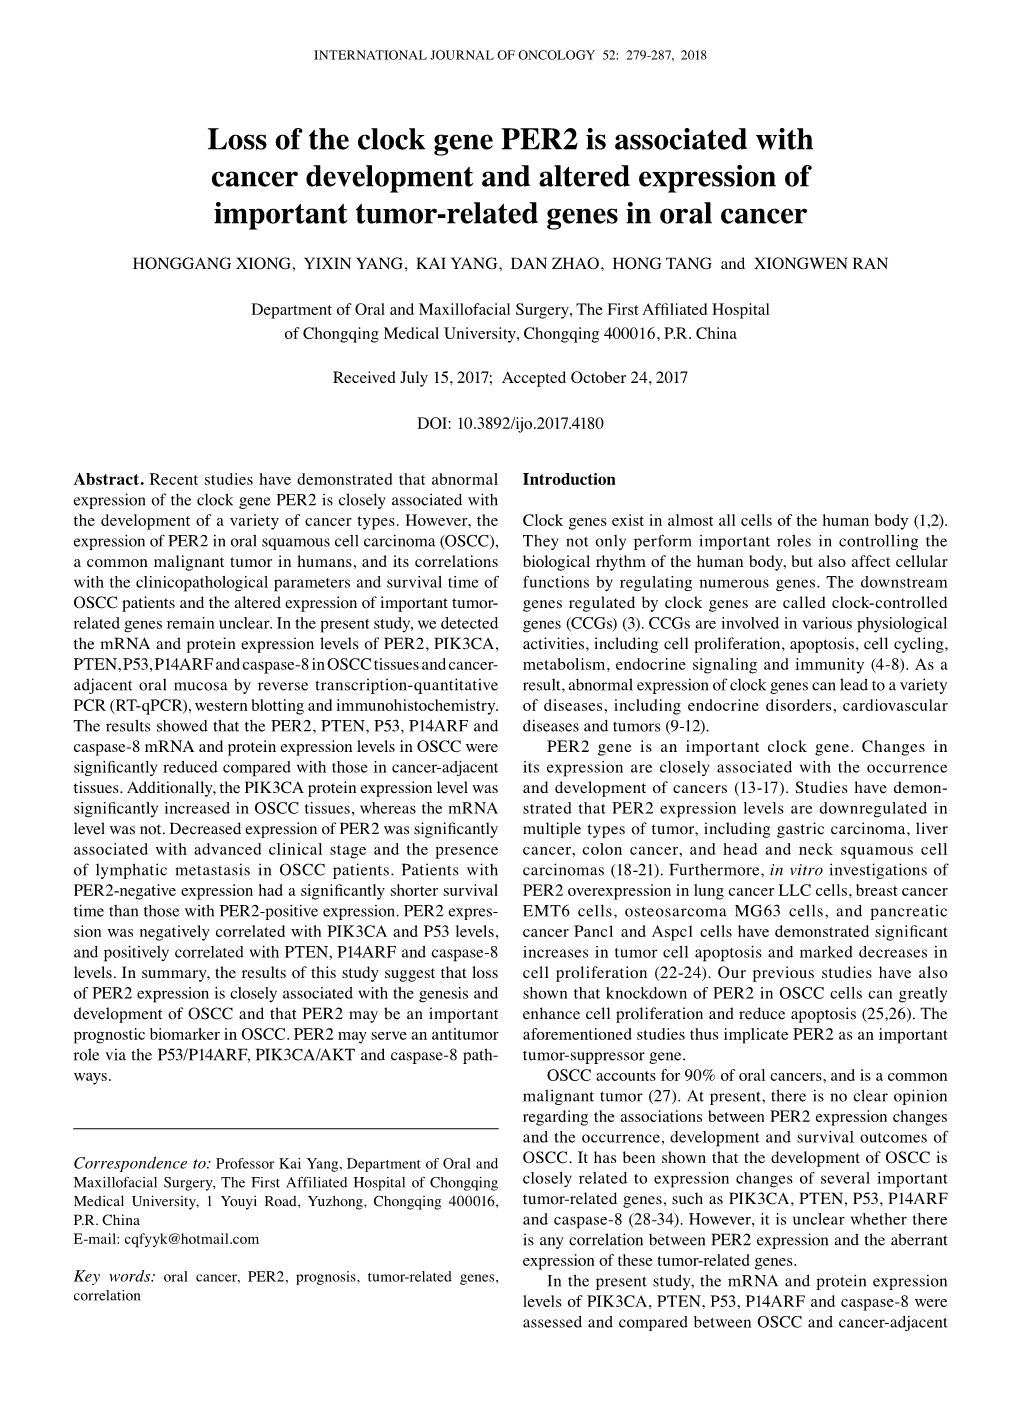 Loss of the Clock Gene PER2 Is Associated with Cancer Development and Altered Expression of Important Tumor-Related Genes in Oral Cancer